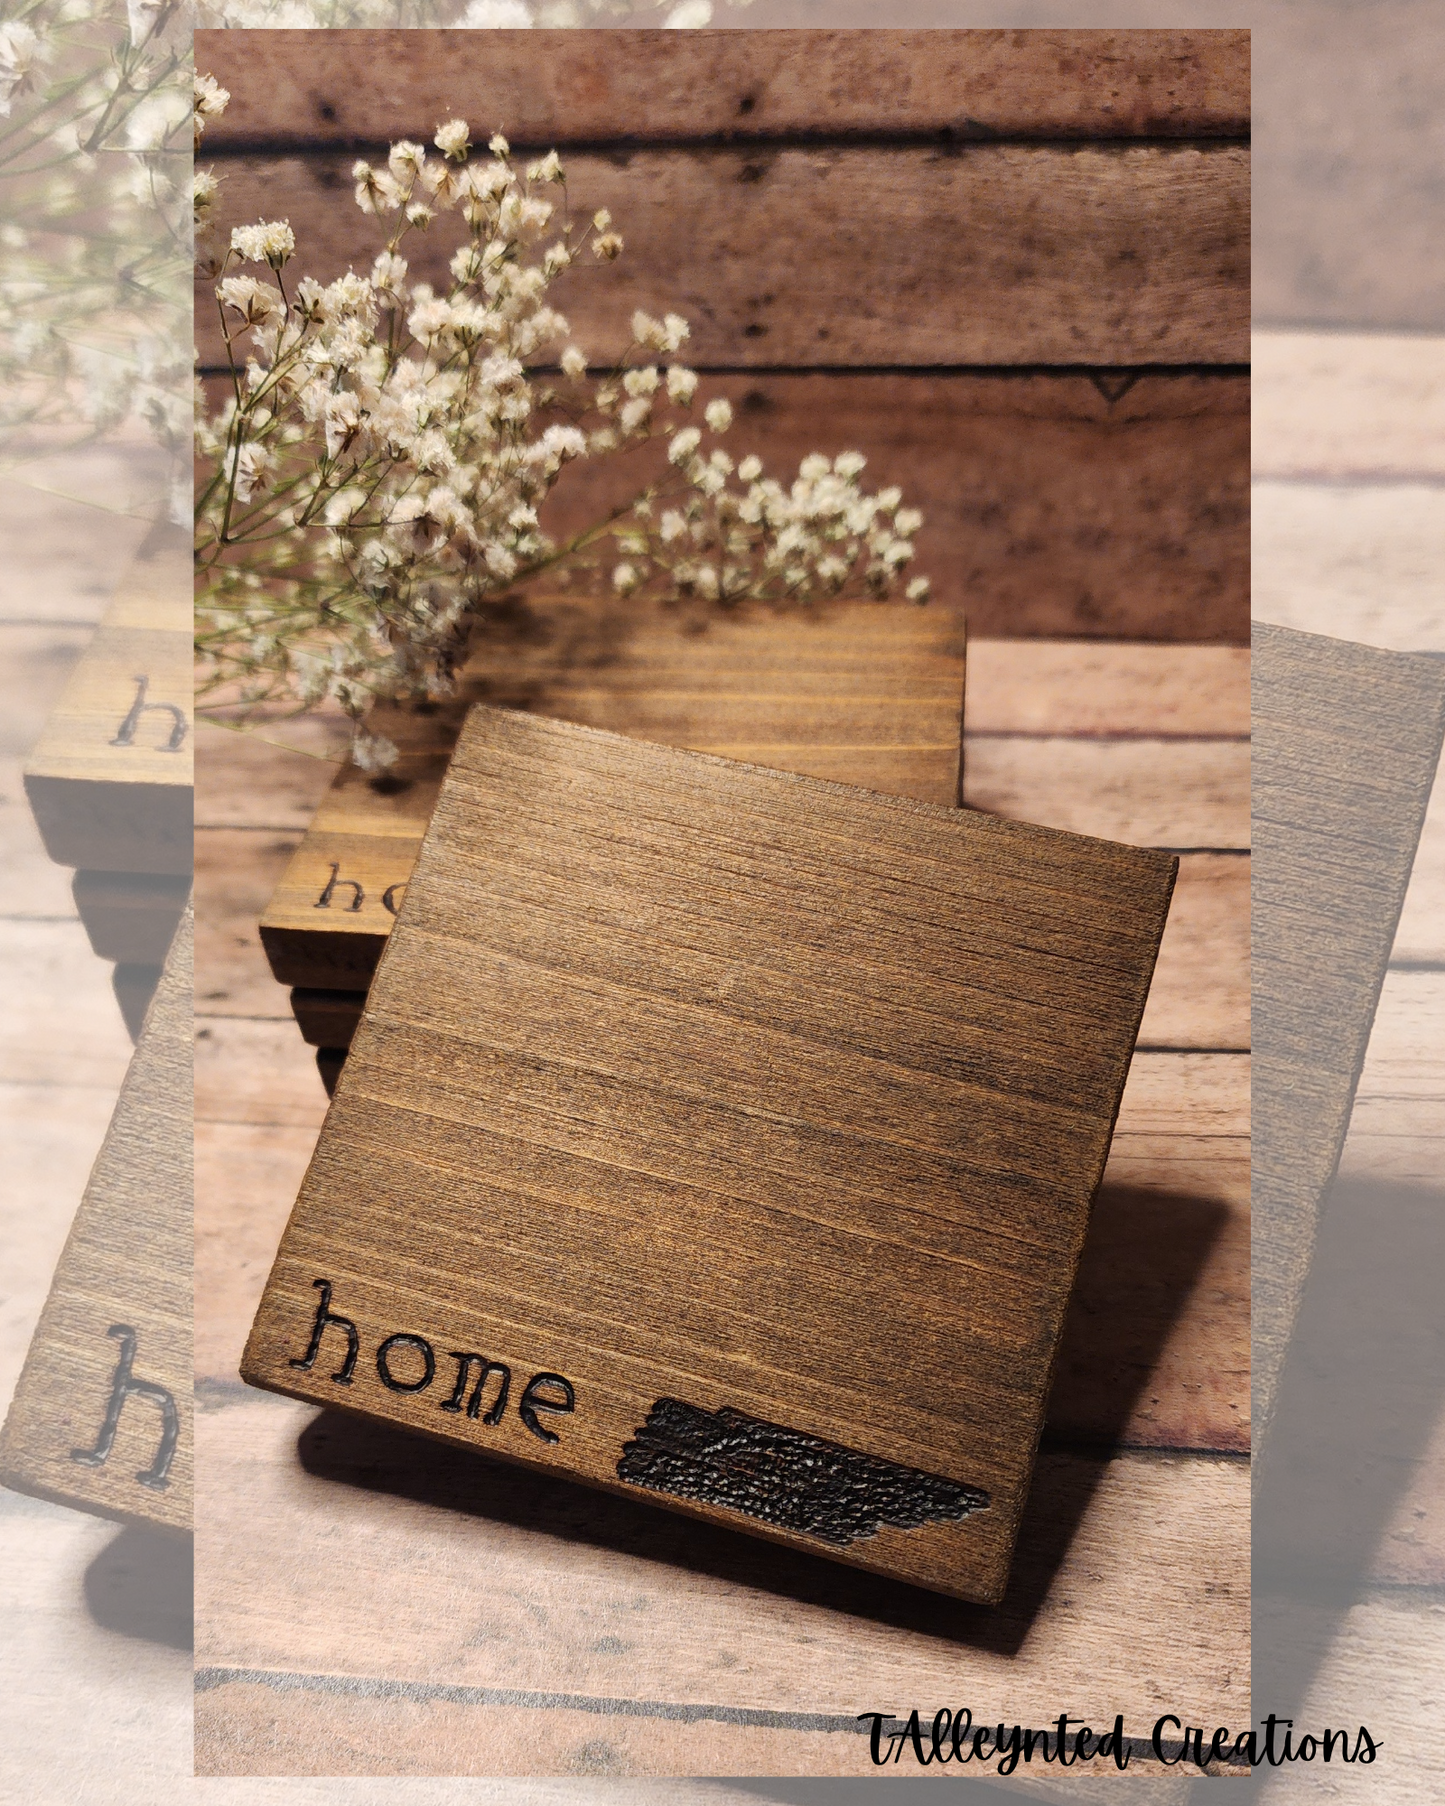 Hand burned coaster set of 4 with word "HOME" and pyrography state Tennessee